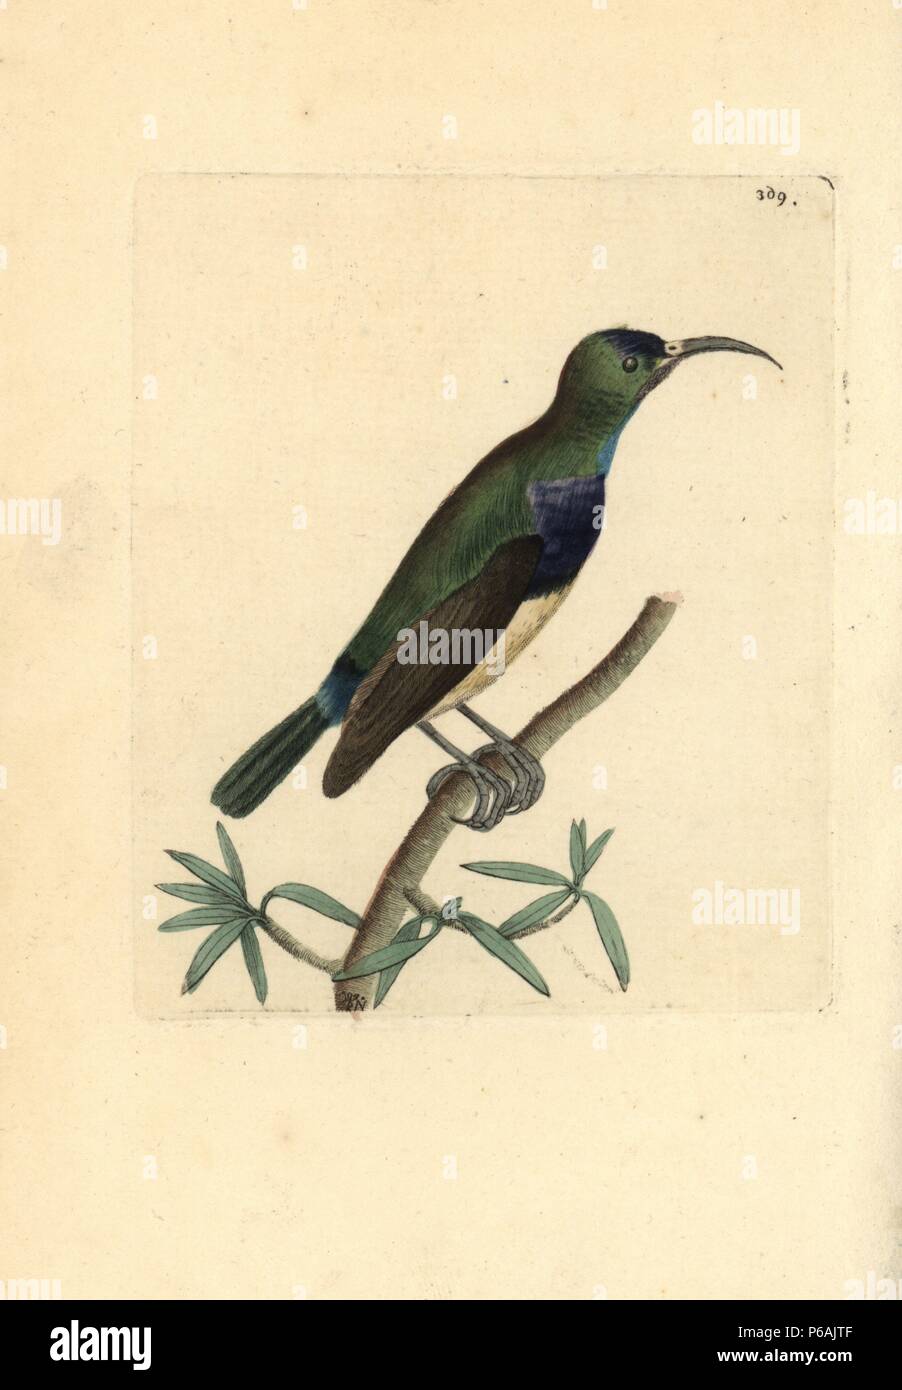 Variable sunbird, Cinnyris venustus. Illustration drawn and engraved by Richard Polydore Nodder. Handcolored copperplate engraving from George Shaw and Frederick Nodder's 'The Naturalist's Miscellany,' London, 1799. Most of the 1,064 illustrations of animals, birds, insects, crustaceans, fishes, marine life and microscopic creatures were drawn by George Shaw, Frederick Nodder and Richard Nodder, and engraved and published by the Nodder family. Frederick drew and engraved many of the copperplates until his death around 1800, and son Richard (17741823) was responsible for the plates signed RN o Stock Photo